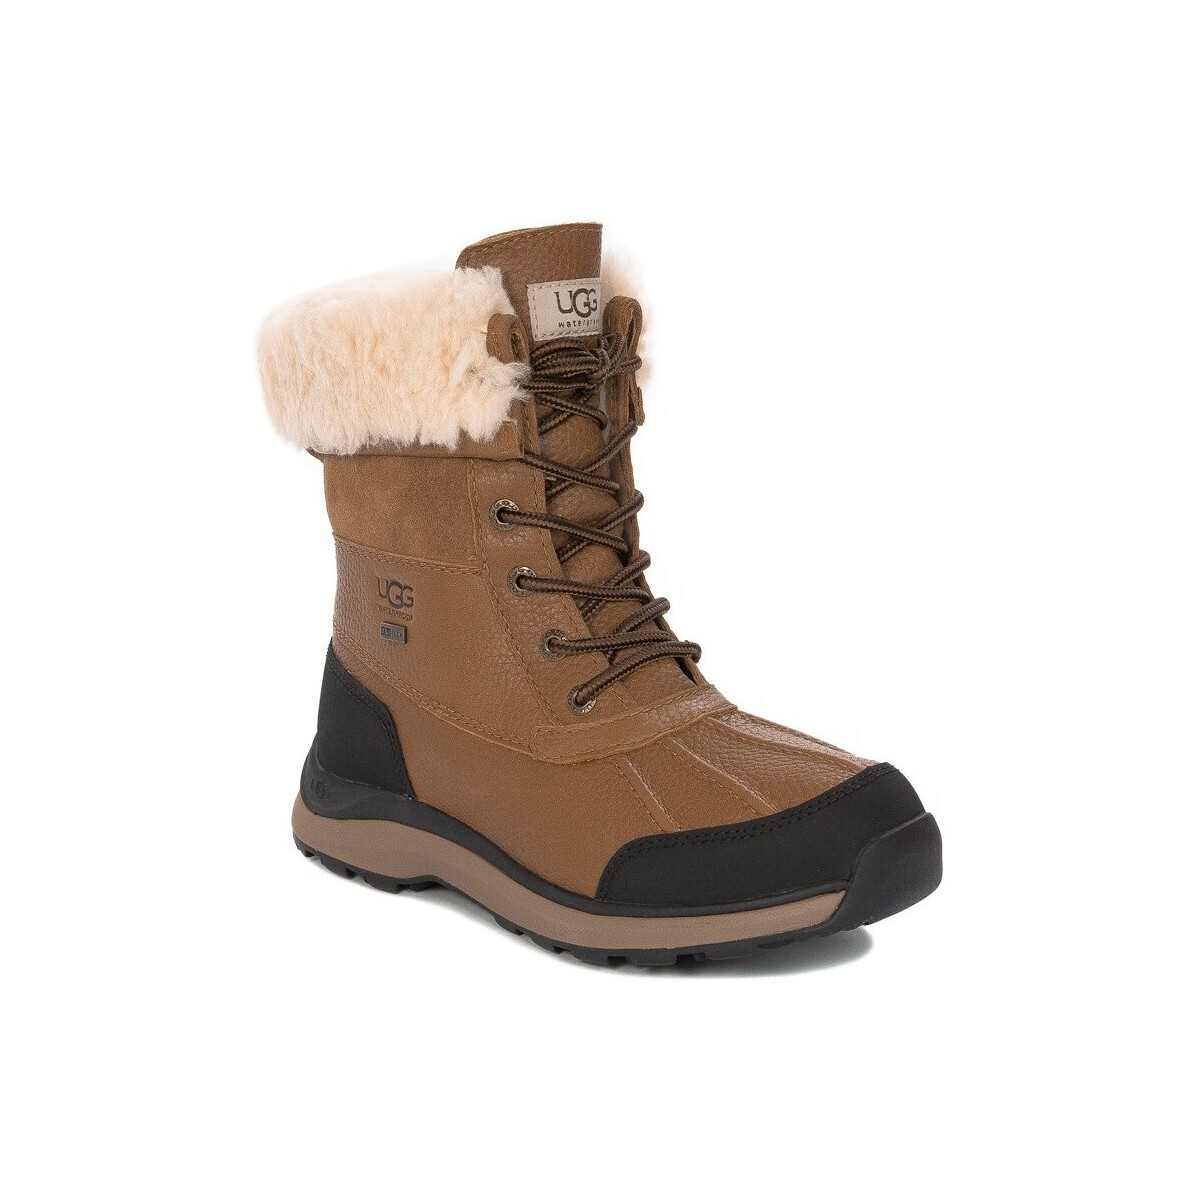 Shoes Women Snow boots UGG Adirondack Boot Iii Chestnut Brown